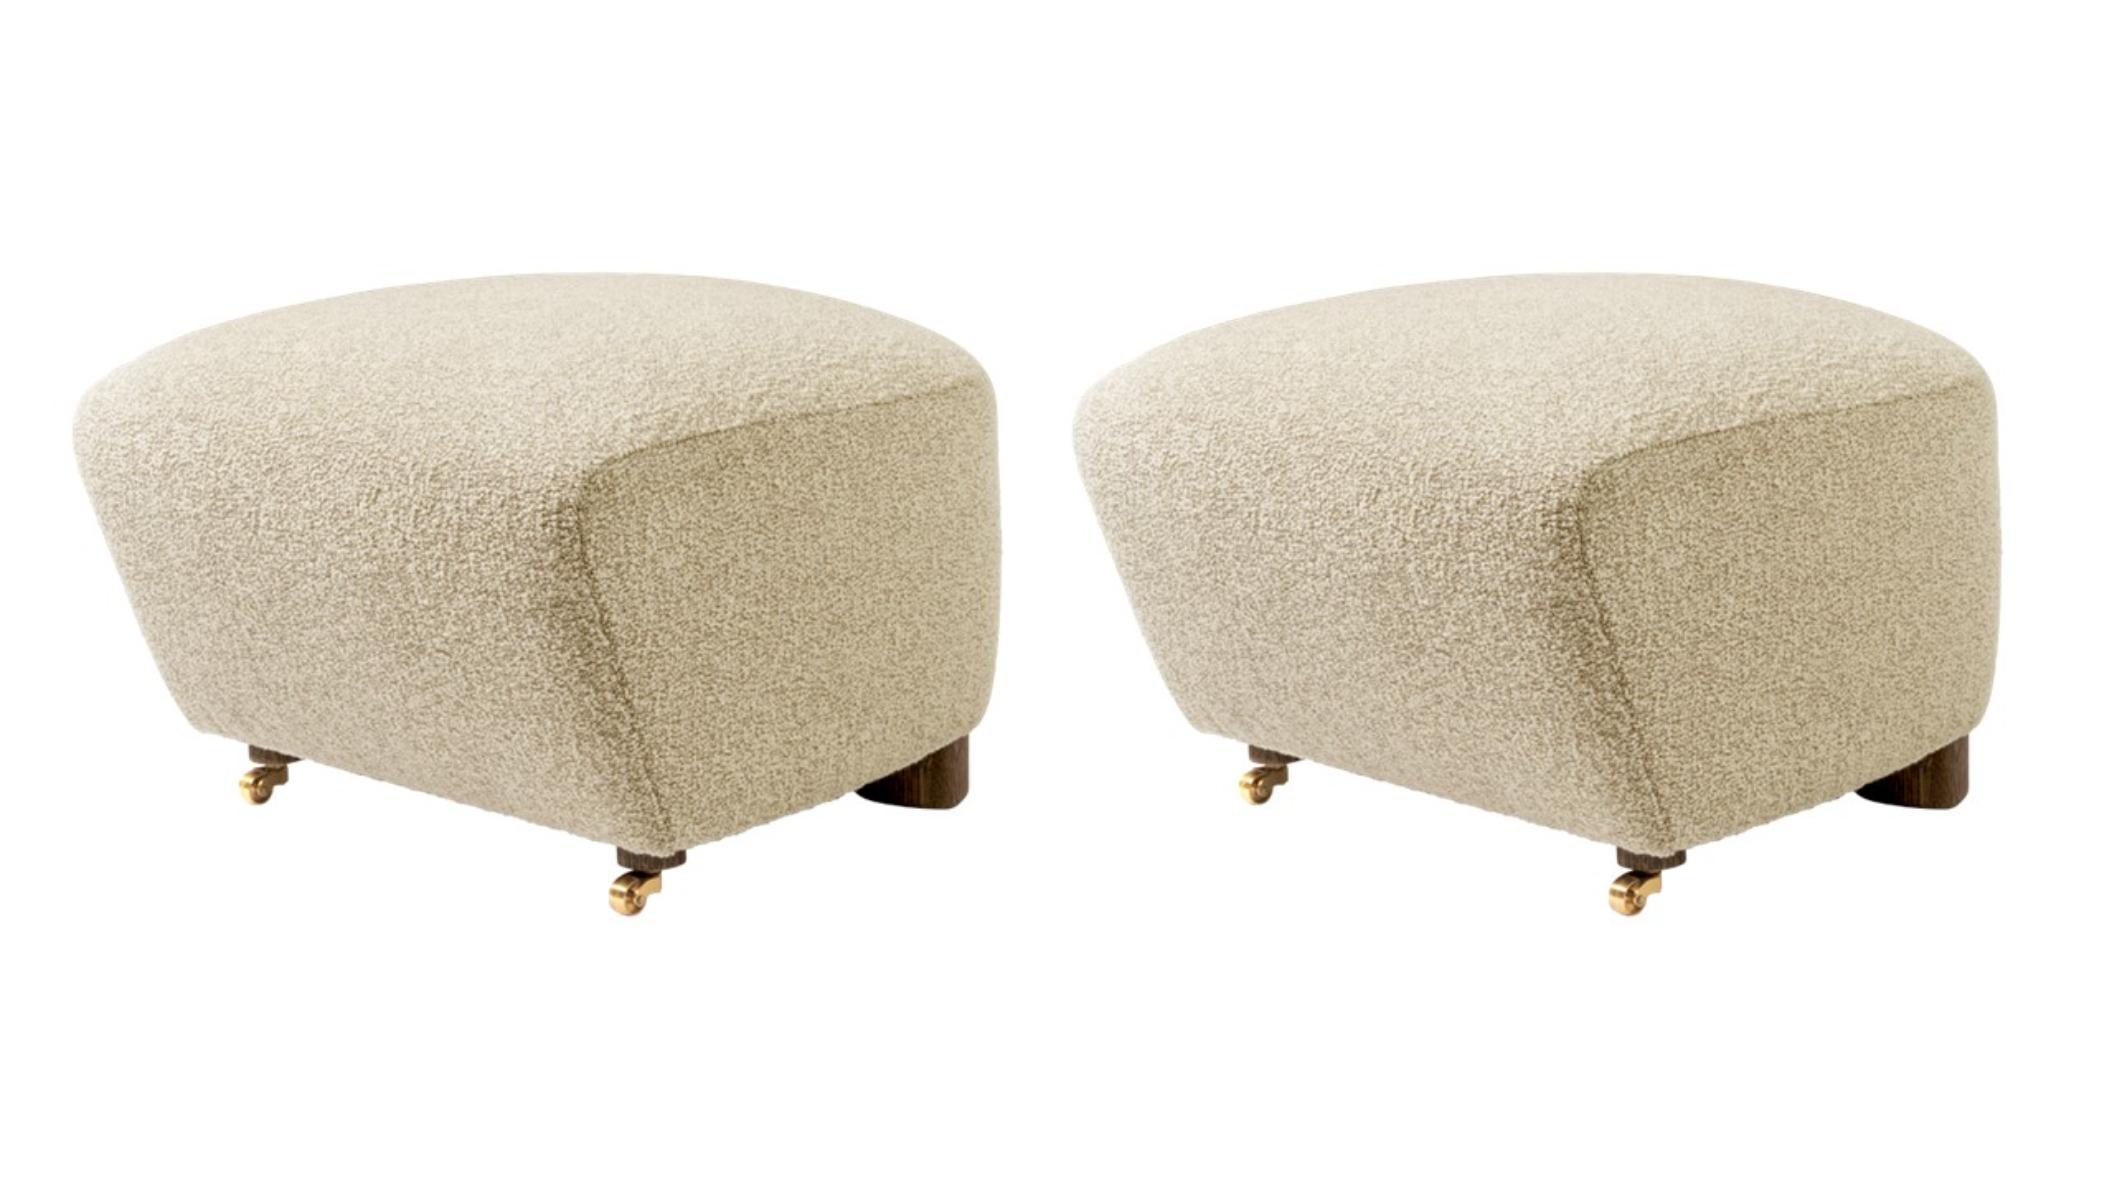 Set of 2 beige smoked oak sahco zero the tired man footstool by Lassen.
Dimensions: W 55 x D 53 x H 36 cm 
Materials: Textile

Flemming Lassen designed the overstuffed easy chair, The Tired Man, for The Copenhagen Cabinetmakers’ Guild